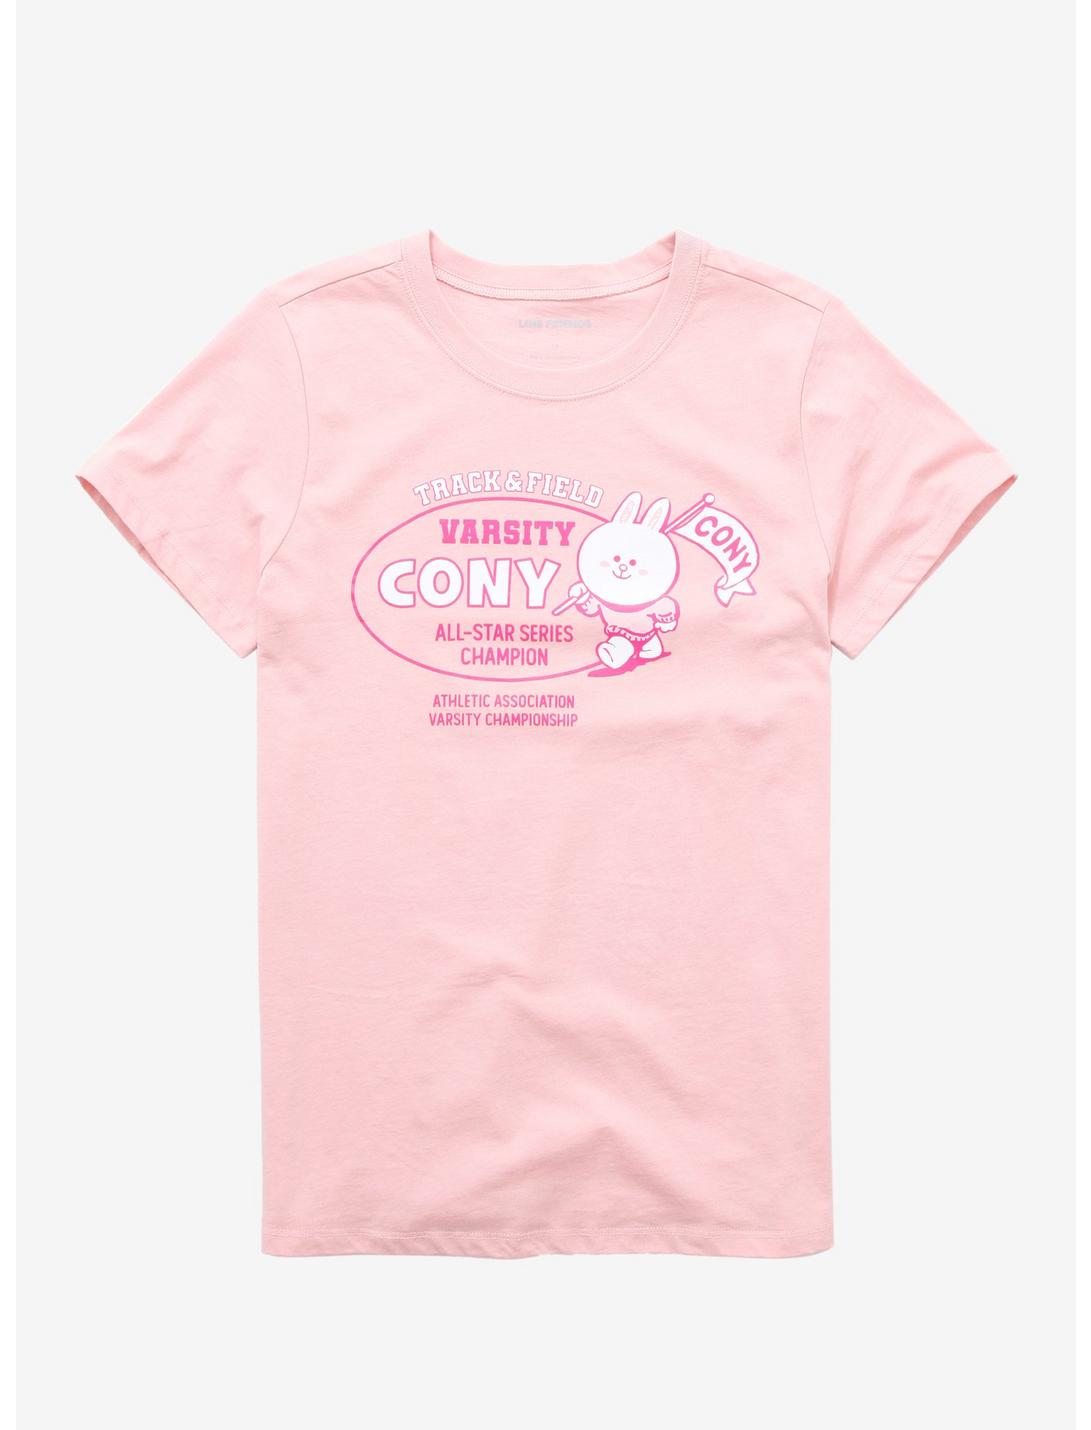 LINE FRIENDS BROWN & FRIENDS Varsity CONY Women's T-Shirt - BoxLunch Exclusive, LIGHT PINK, hi-res